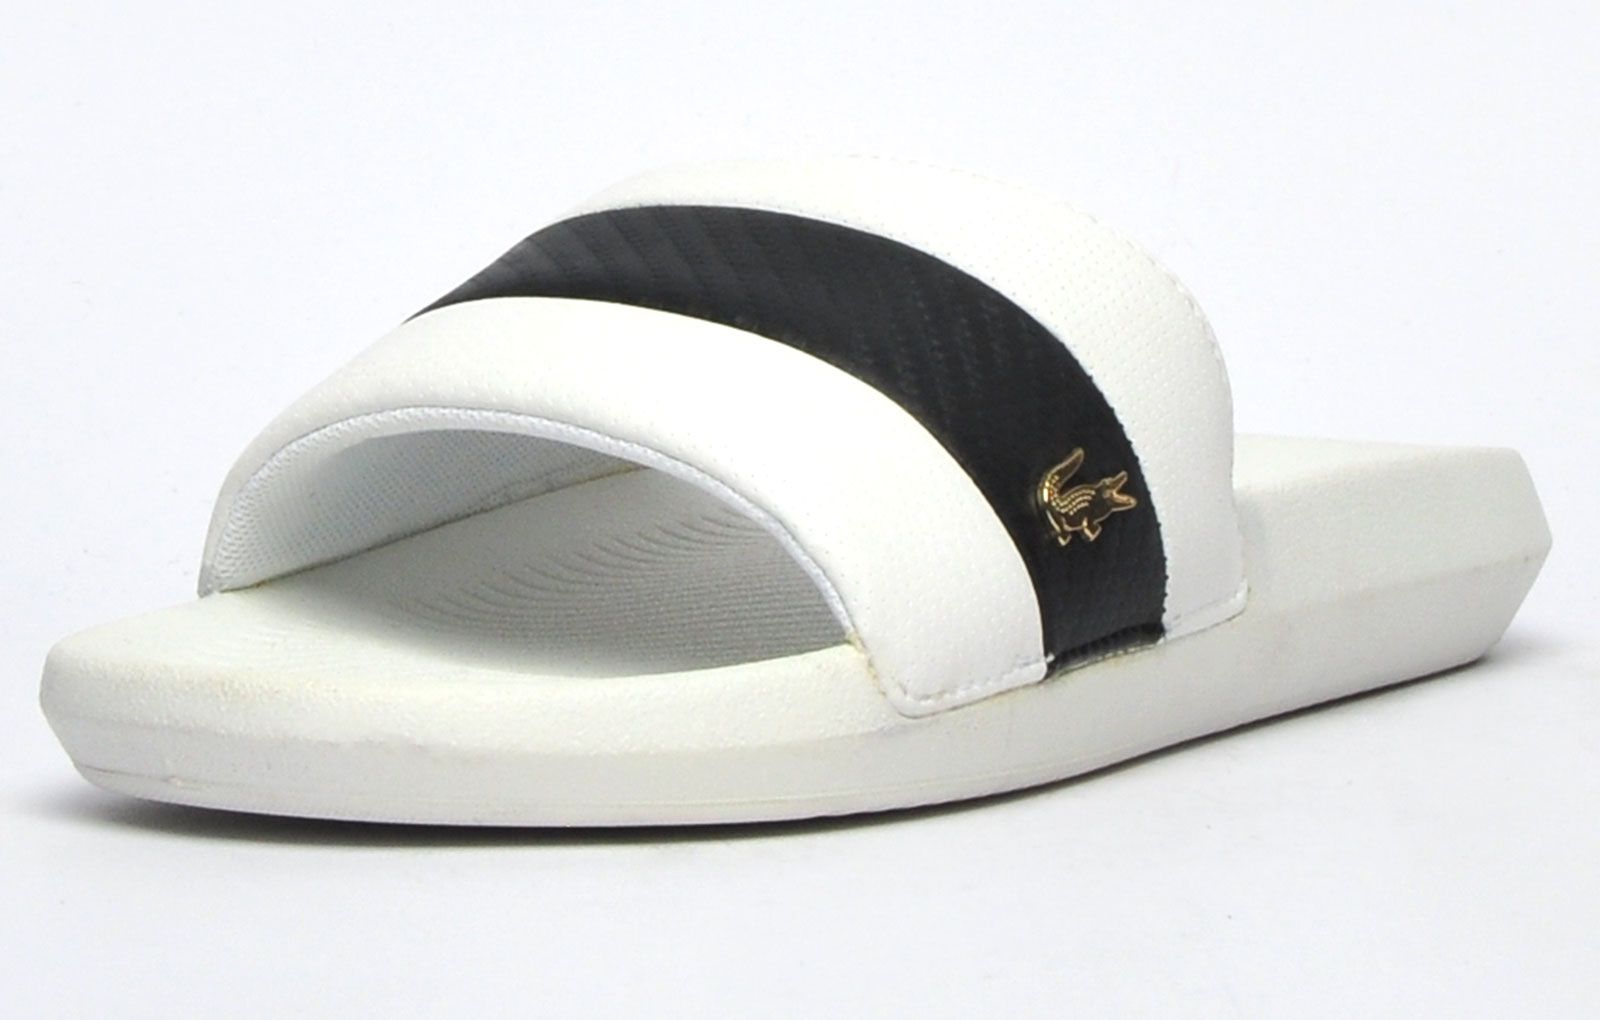 Step into on trend summer style with these mensCroco Slides from Lacoste. In a classic colourway, these designer sandals are delivered in a smooth synthetic upper with band stripe detailing across the forefoot foot strap. The super comfy moulded footbed delivers the perfect fit and feel while the grippy outsole will keep you sure and safe around the pool or in the shower. These designer slides are finished with eye catching Lacoste branding throughout just in case you want a sign of approval that youre wearing cool on trend style this summer season 
 
 - Synthetic comfort upper
 - Comfort moulded footbed
 - Single strap construction
 - Grippy outsole
 - Slip on wear
 - Iconic Lacoste branding throughout
 Please Note: These slides are supplied poly bagged (without box)
 These Lacoste Slides are sold as B grades which means there may be some very slight cosmetic issues on the shoe and they come in a poly bag. There could be occasional issues with wrong swing tags being allocated to wrong shoes by Lacoste themselves which could result in some size confusion but you must take the size IN THE SHOE as the size that the shoe actually is ( not what is on the tag ). We have checked most of the shoes and in our opinion,all are practically perfect without any blemishes on them at all and in essence if the shoes did not have the letter B denoted on the swing tag you would presume these were perfect shoes. All shoes are guaranteed against fair wear and tear and offer a substantial saving against the normal high street price. The overall function or performance of the shoe will not be affected by any minor cosmetic issues. B Grades are original authentic products released by the brand manufacturer with their approval at greatly reduced prices. If you are unhappy with your purchase, we will be more than happy to take the shoes back from you and issue a full refund